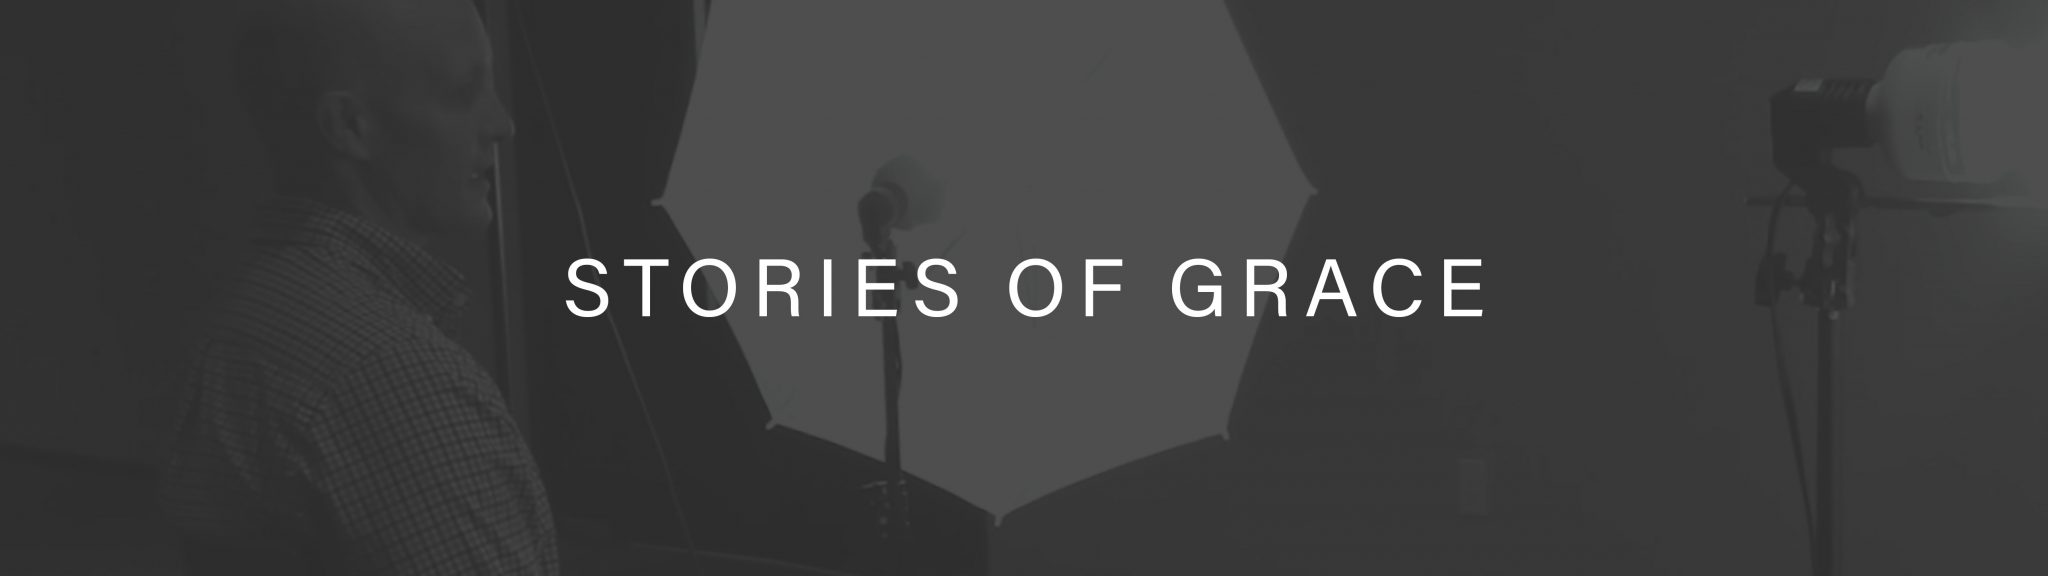 stories-of-grace